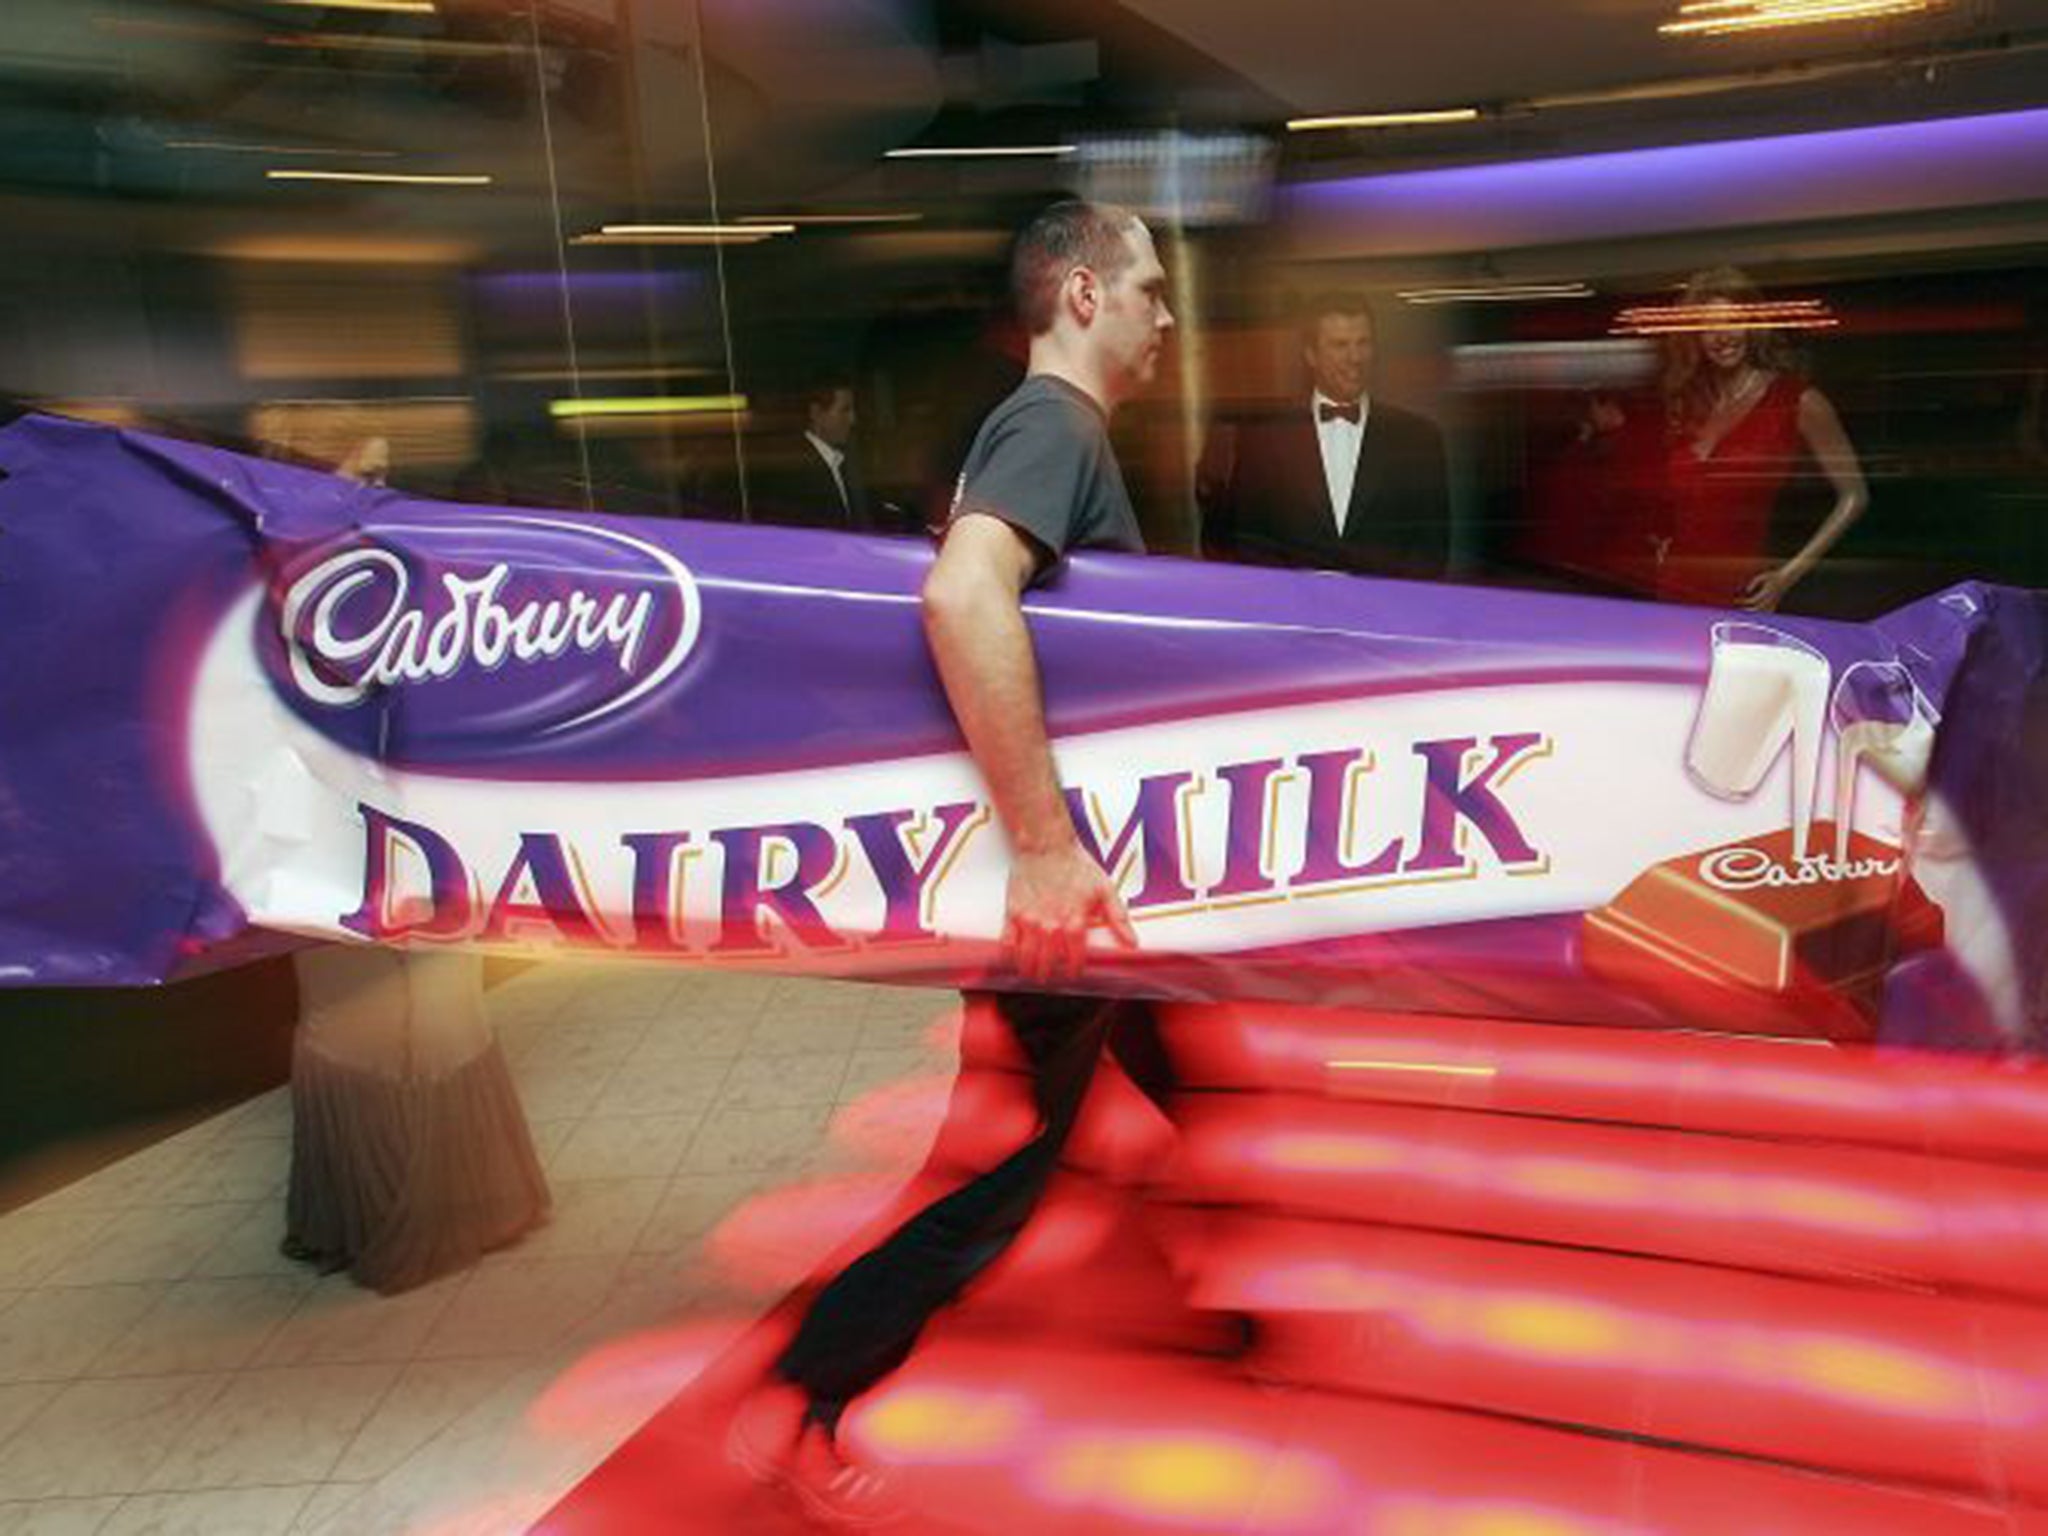 Mondelez International, formerly known as Kraft Foods, has lawfully avoided paying tens of millions of pounds in corporation tax since it acquired the chocolate manufacturer for £11.5bn five years ago